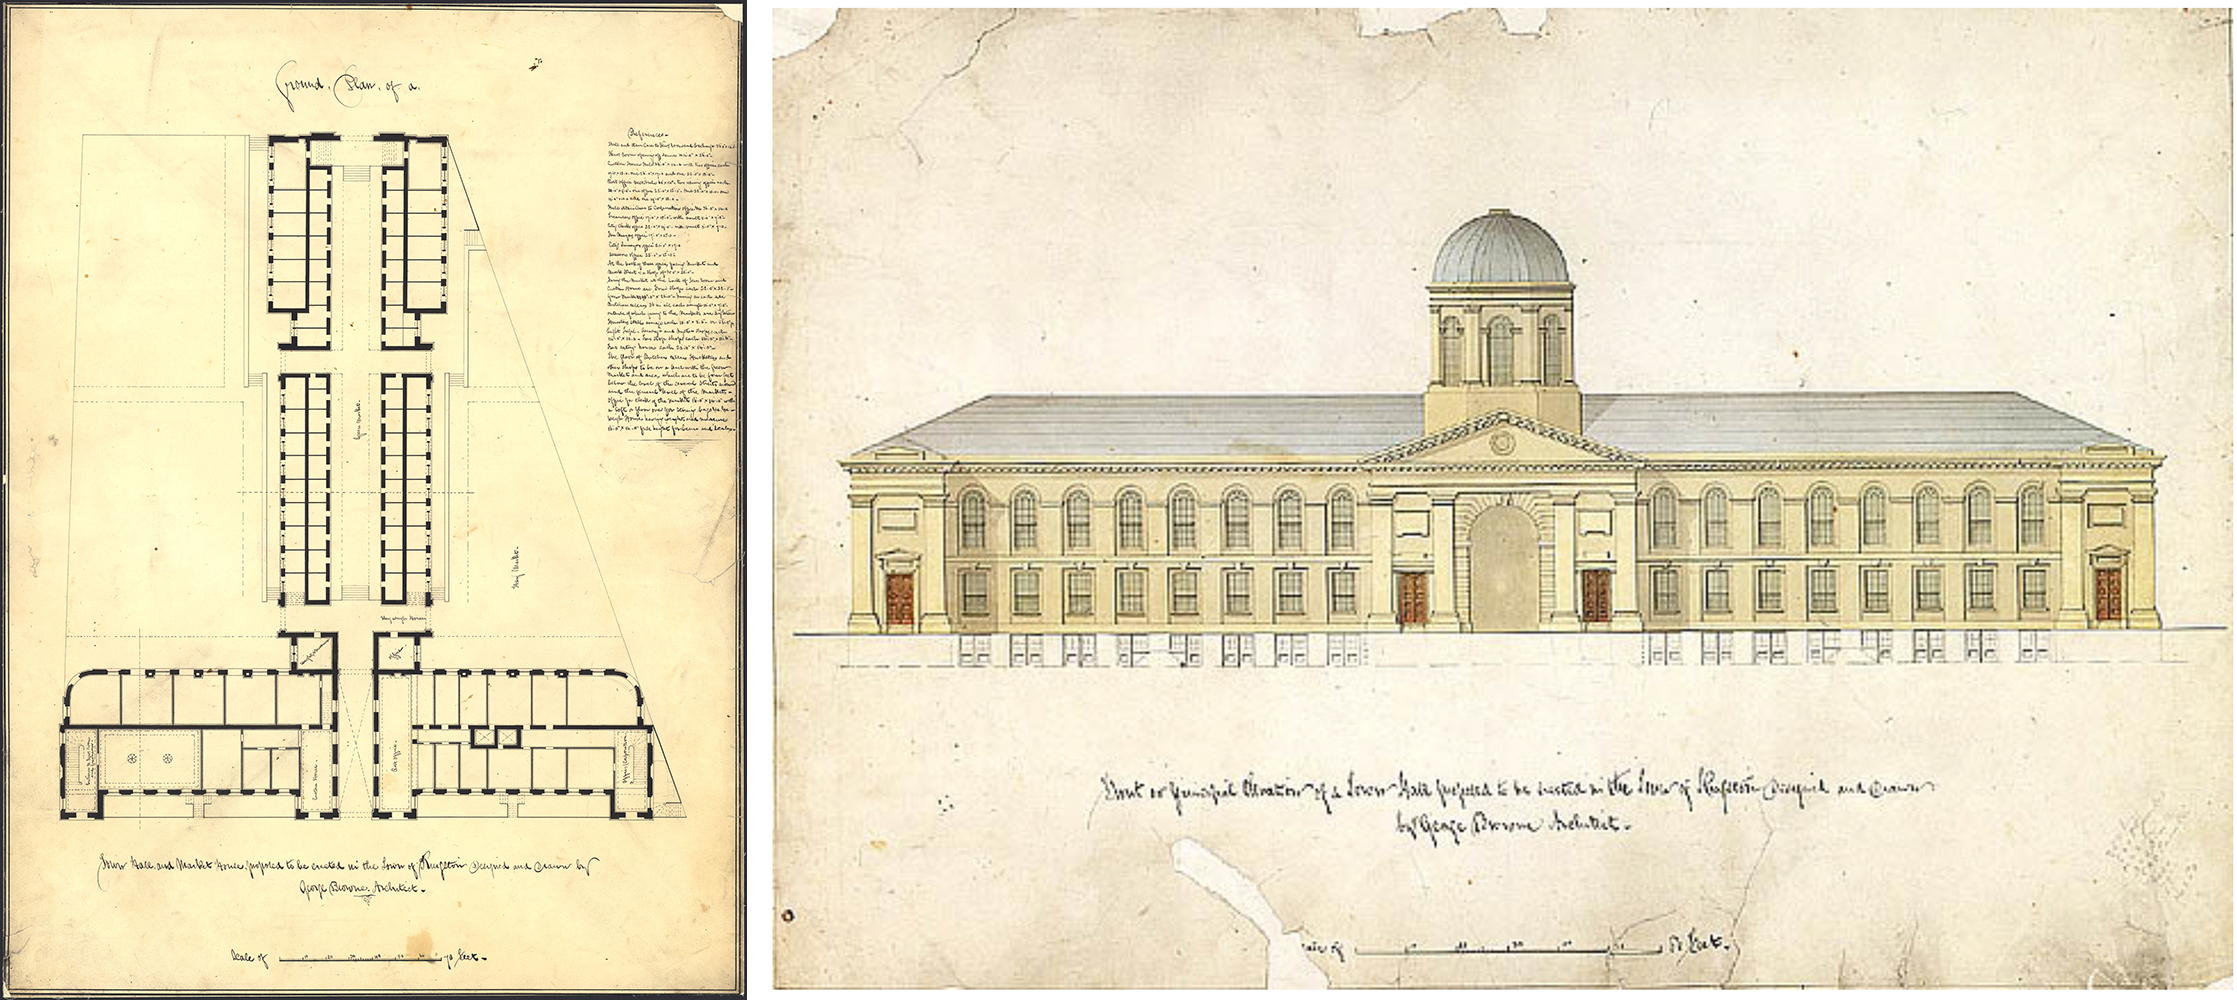 Left: Historic plan drawing showing the original long market hall. Right: Historic front elevation drawing that does not include a clock on the central dome.